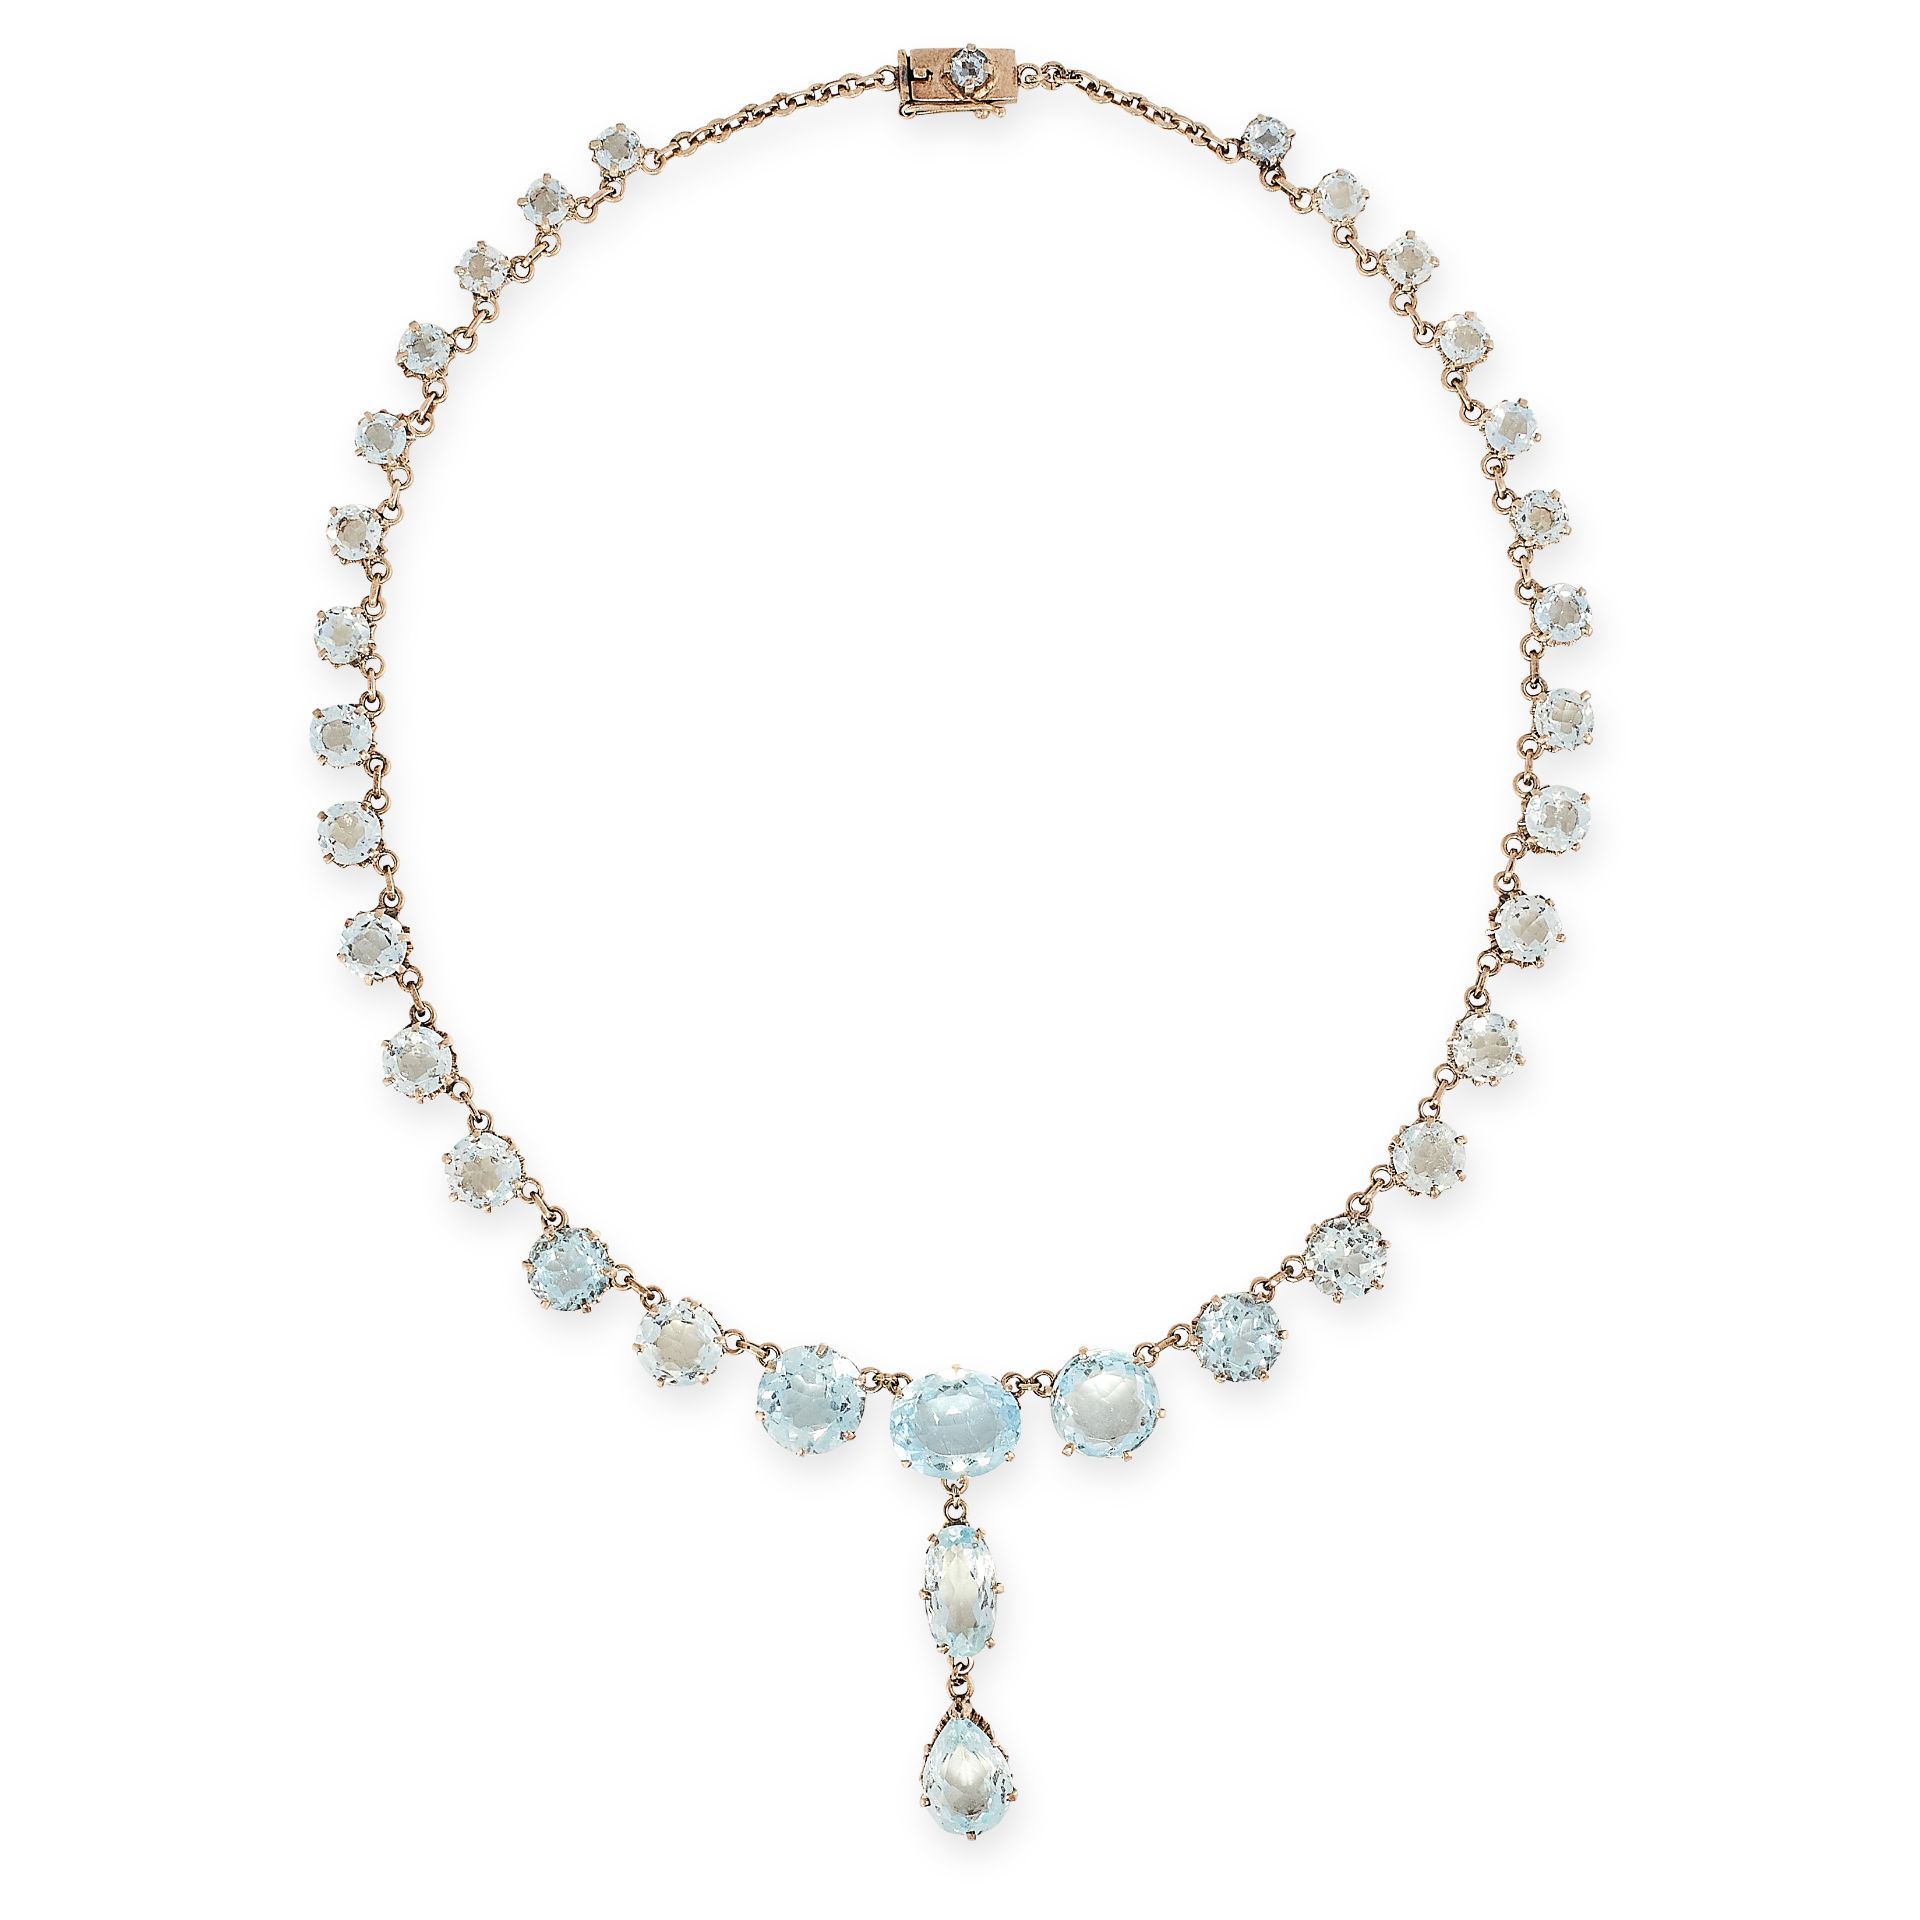 AQUAMARINE RIVIERE NECKLACE mounted in 18ct gold, formed of a row of thirty-one graduated oval cut